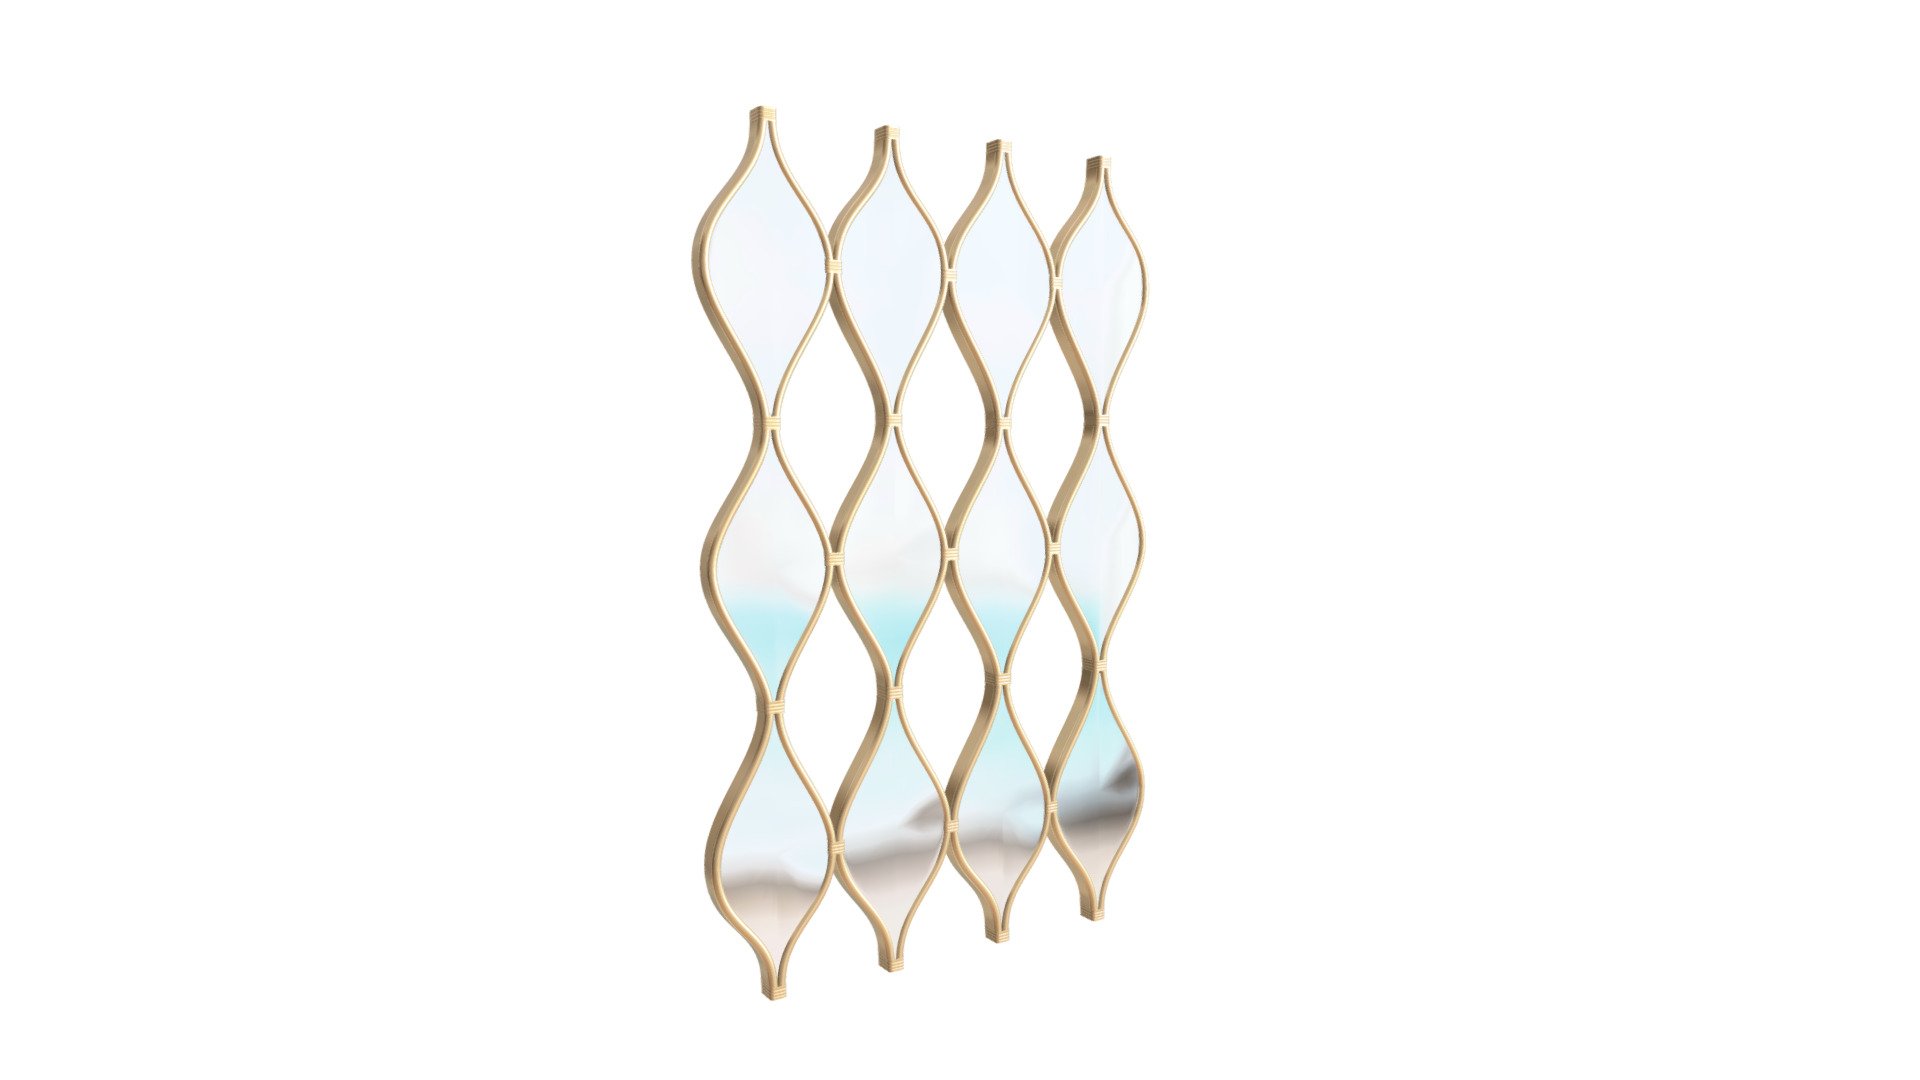 https://zuomod.com/Four-Tears-Mirror-Gold

Four rows of undulating pattern create this mirrored wall sculpture with a ripple effect. Make a statement in your entryway by placing it over a console, or in your living space above your modern sofa. Also looks great in multiples filling a wall 3d model